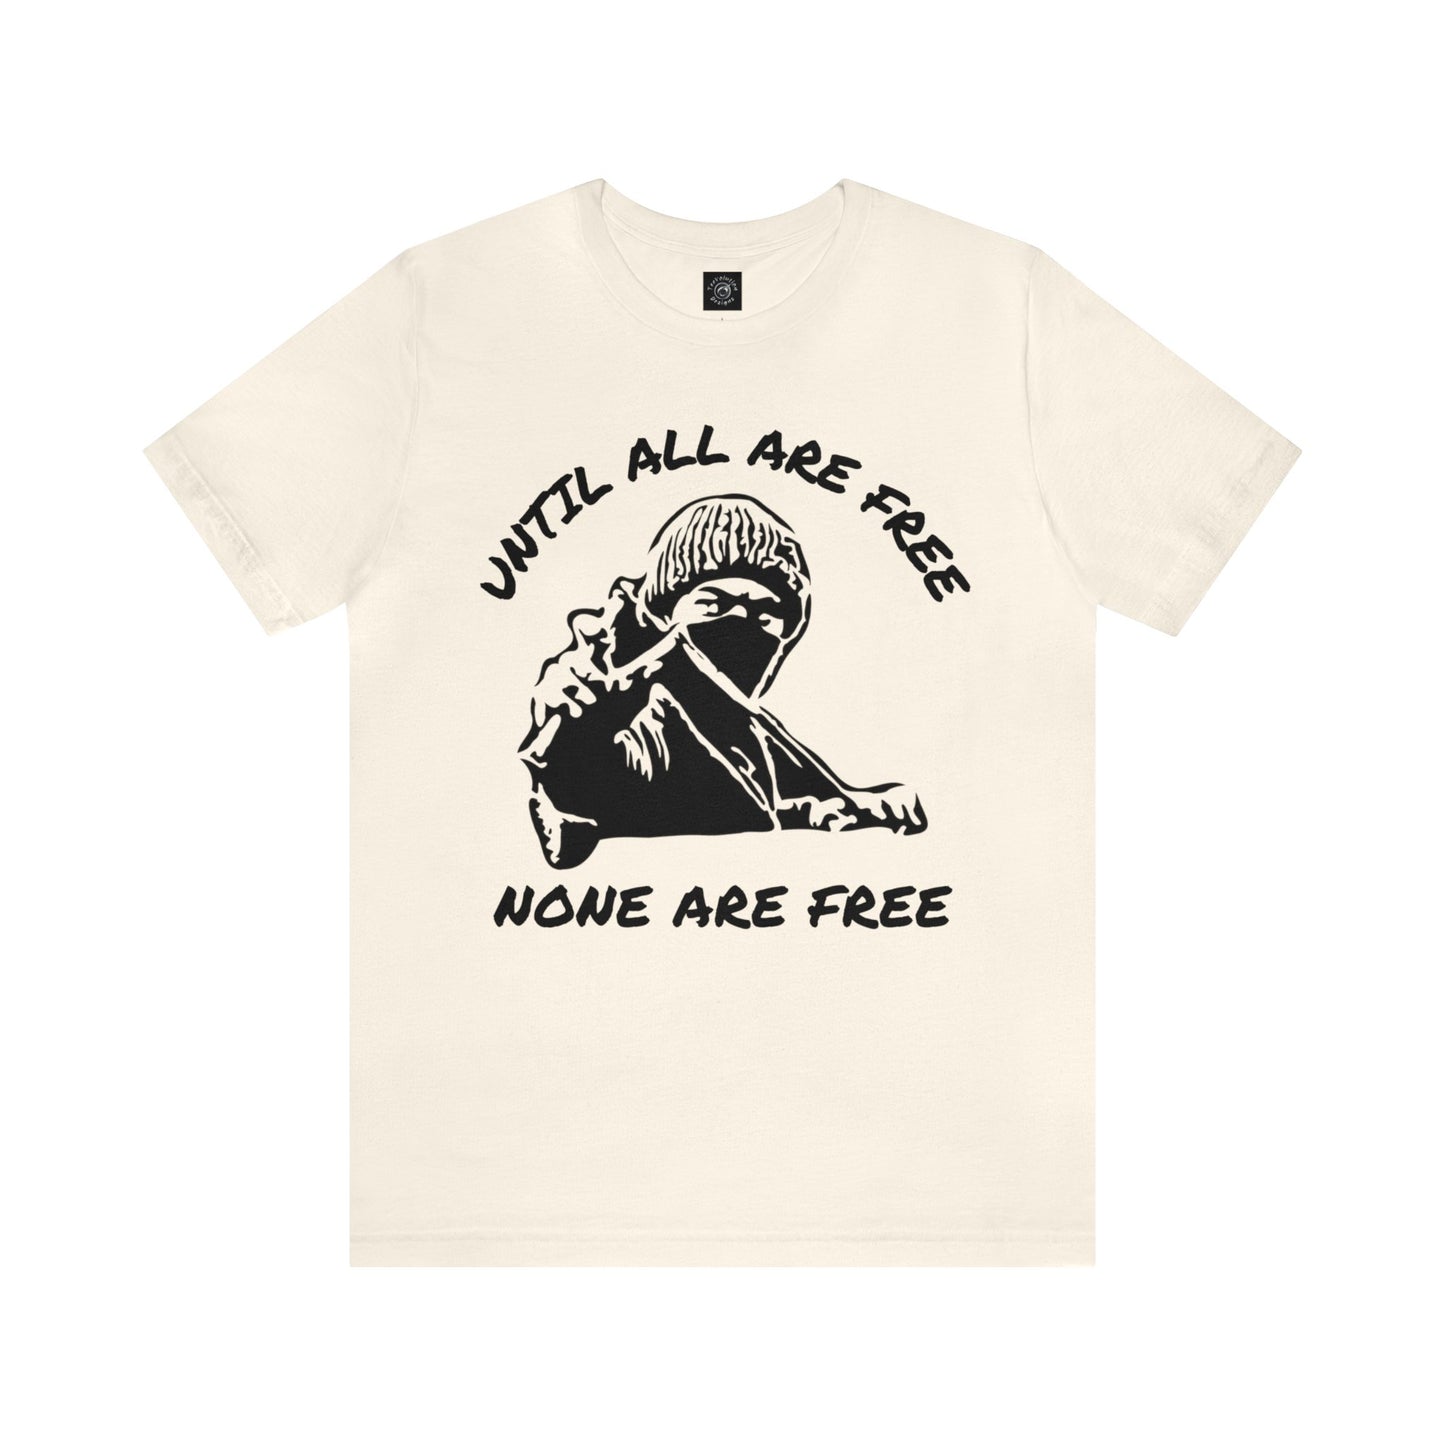 Solidari-Tee |  Liberation | Statement Tee | Slingshot | Until All Are Free | None Are Free | Freedom | Unity | Unisex | Men's | Women's | Tee | T-Shirt